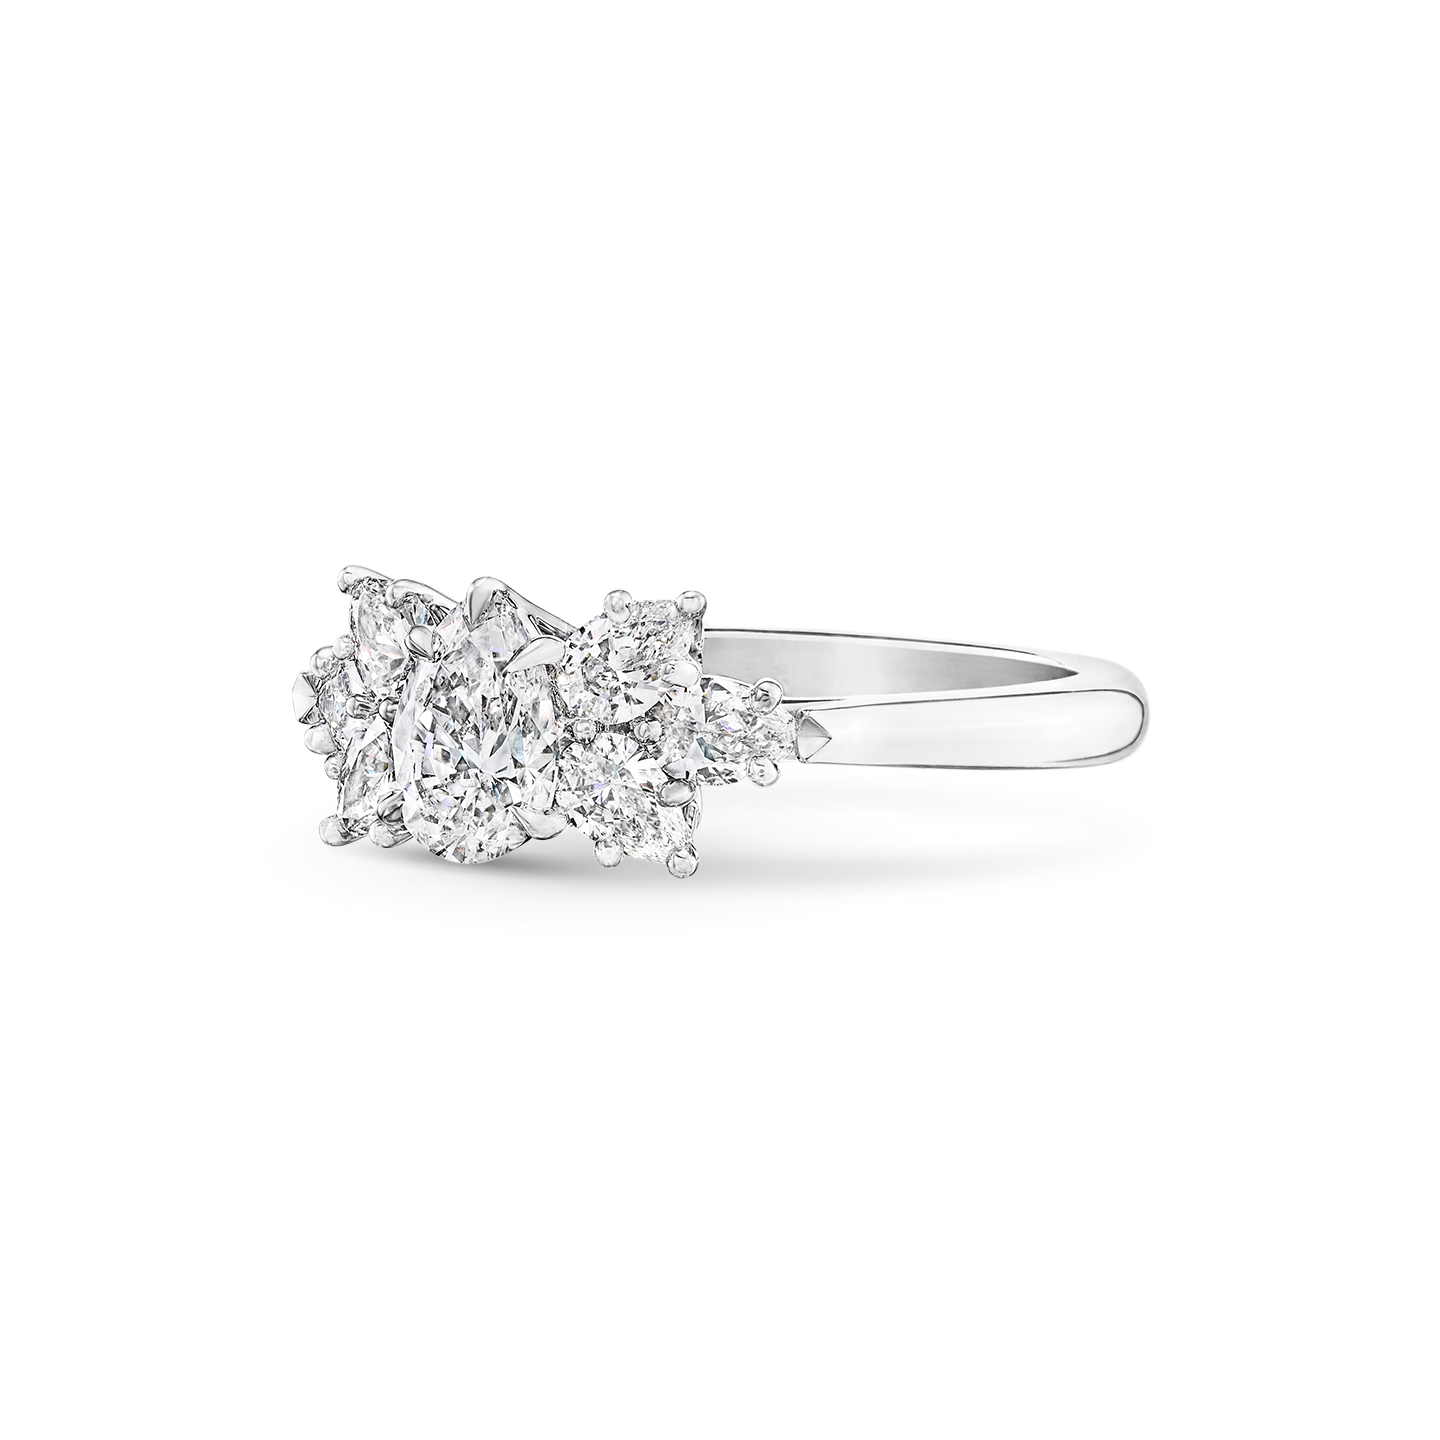 Angled view of the Pear-Shaped Cluster Diamond Engagement Ring